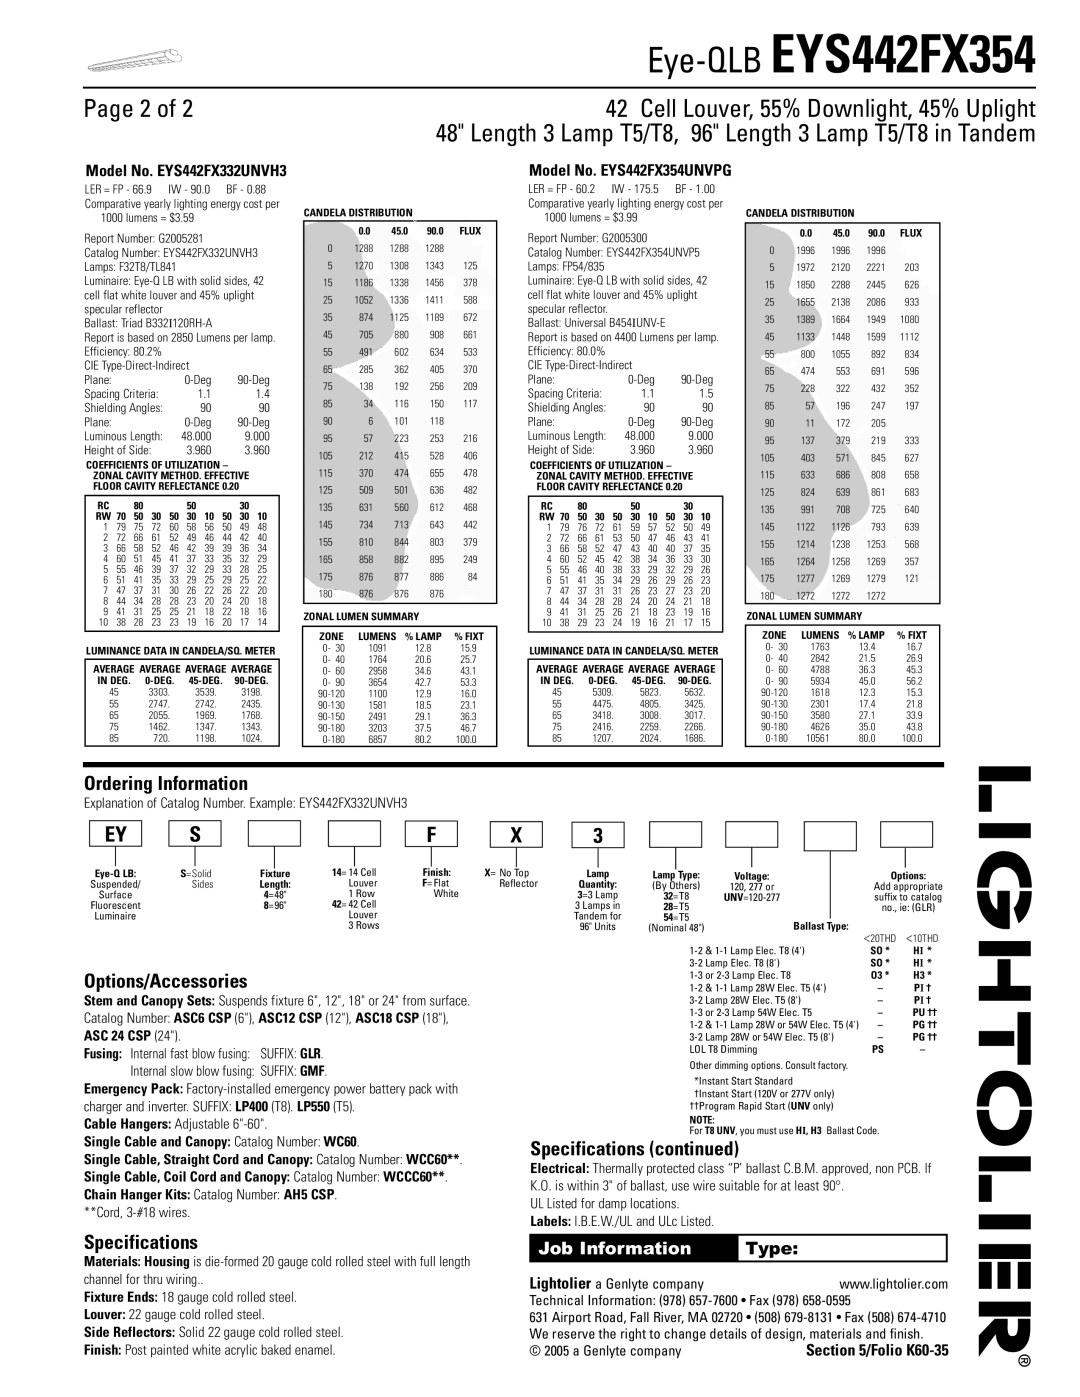 Lightolier EYS442FX354 Page 2 of, Ordering Information, Options/Accessories, Specifications continued, Job Information 